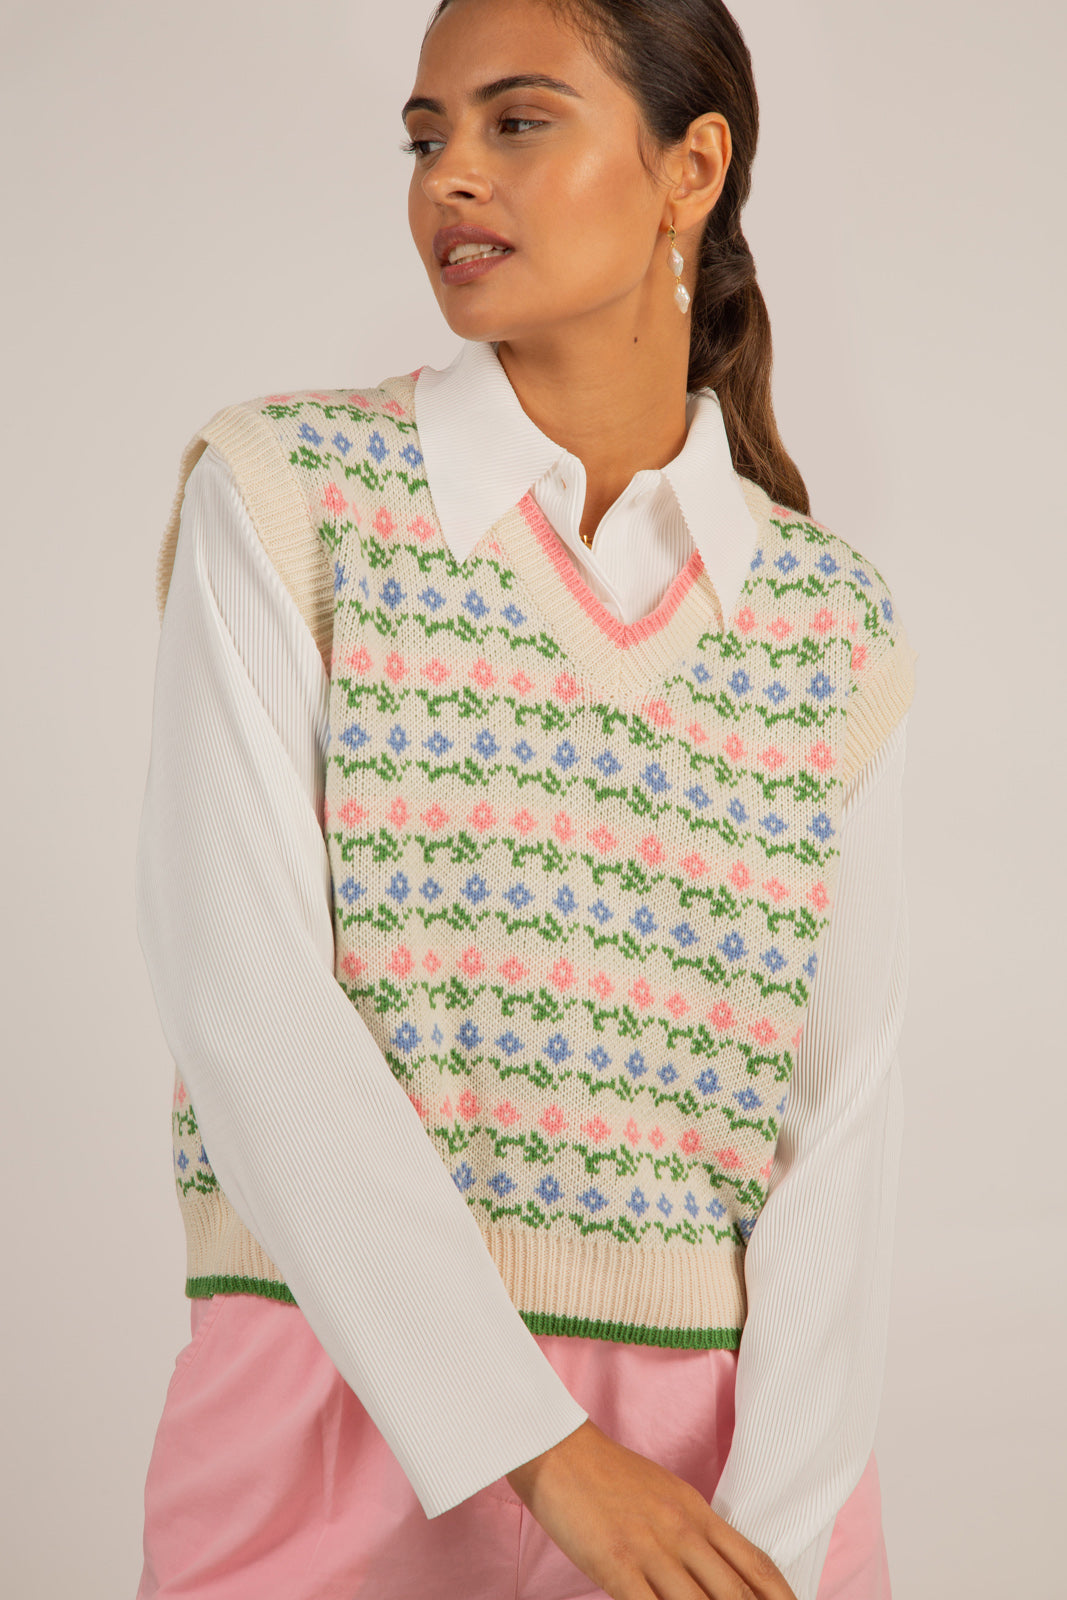 Pink and green tiny intarsia flower sweater vest